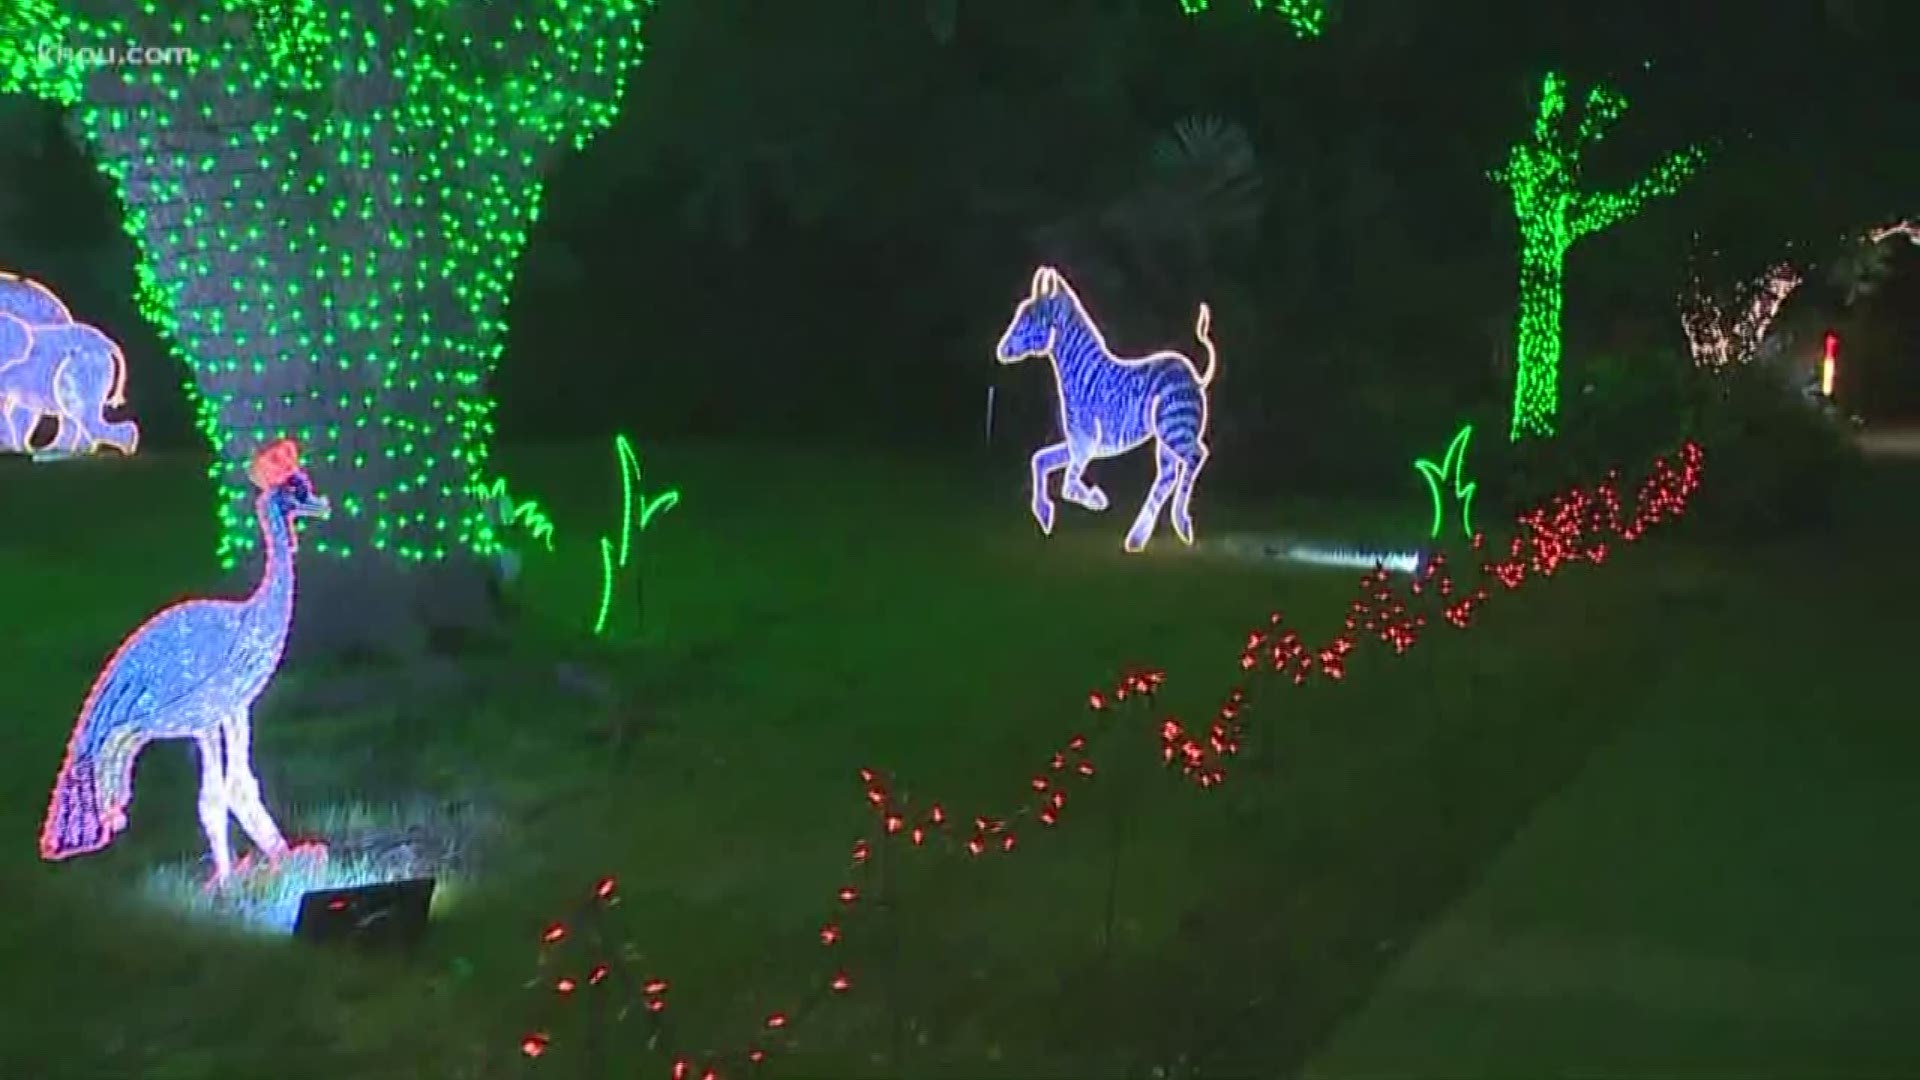 The Christmas lights are going up, and one of the most popular spots to see spectacular lights is the Houston Zoo. KHOU 11 Reporter Blake Mathews gives a sneak peak of what the Houston Zoo Lights look like this year.